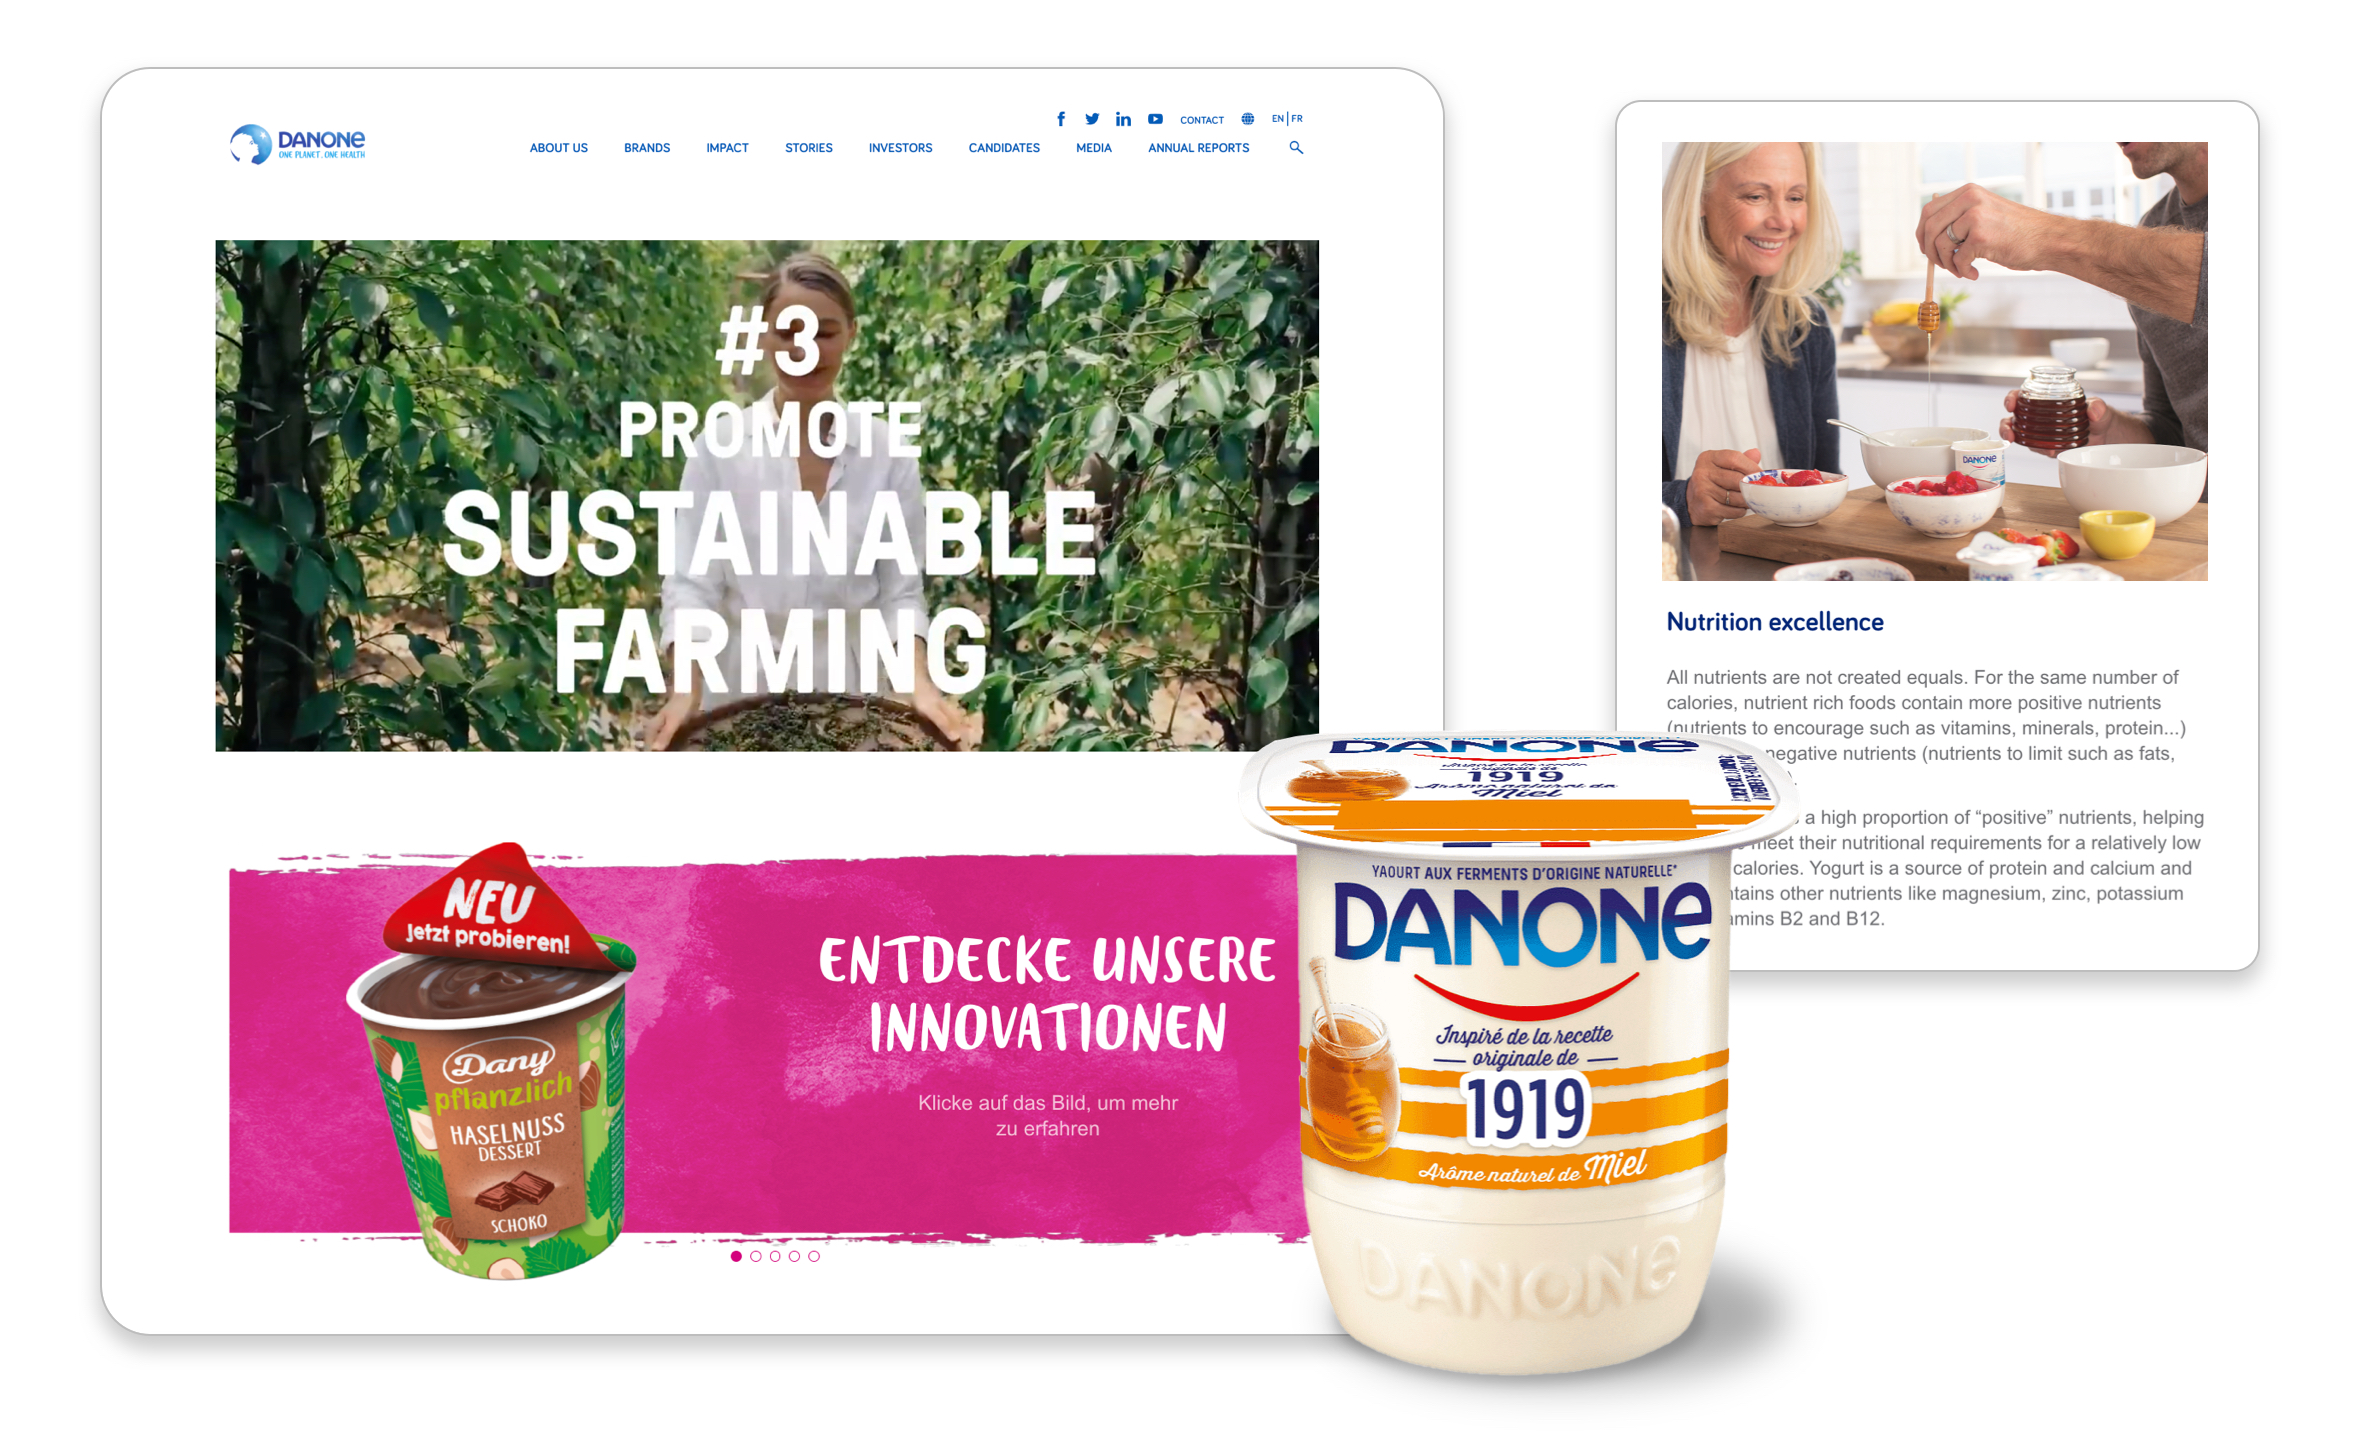 Danone's new digital commerce offers them the flexible data model that they needed to meet their business goals